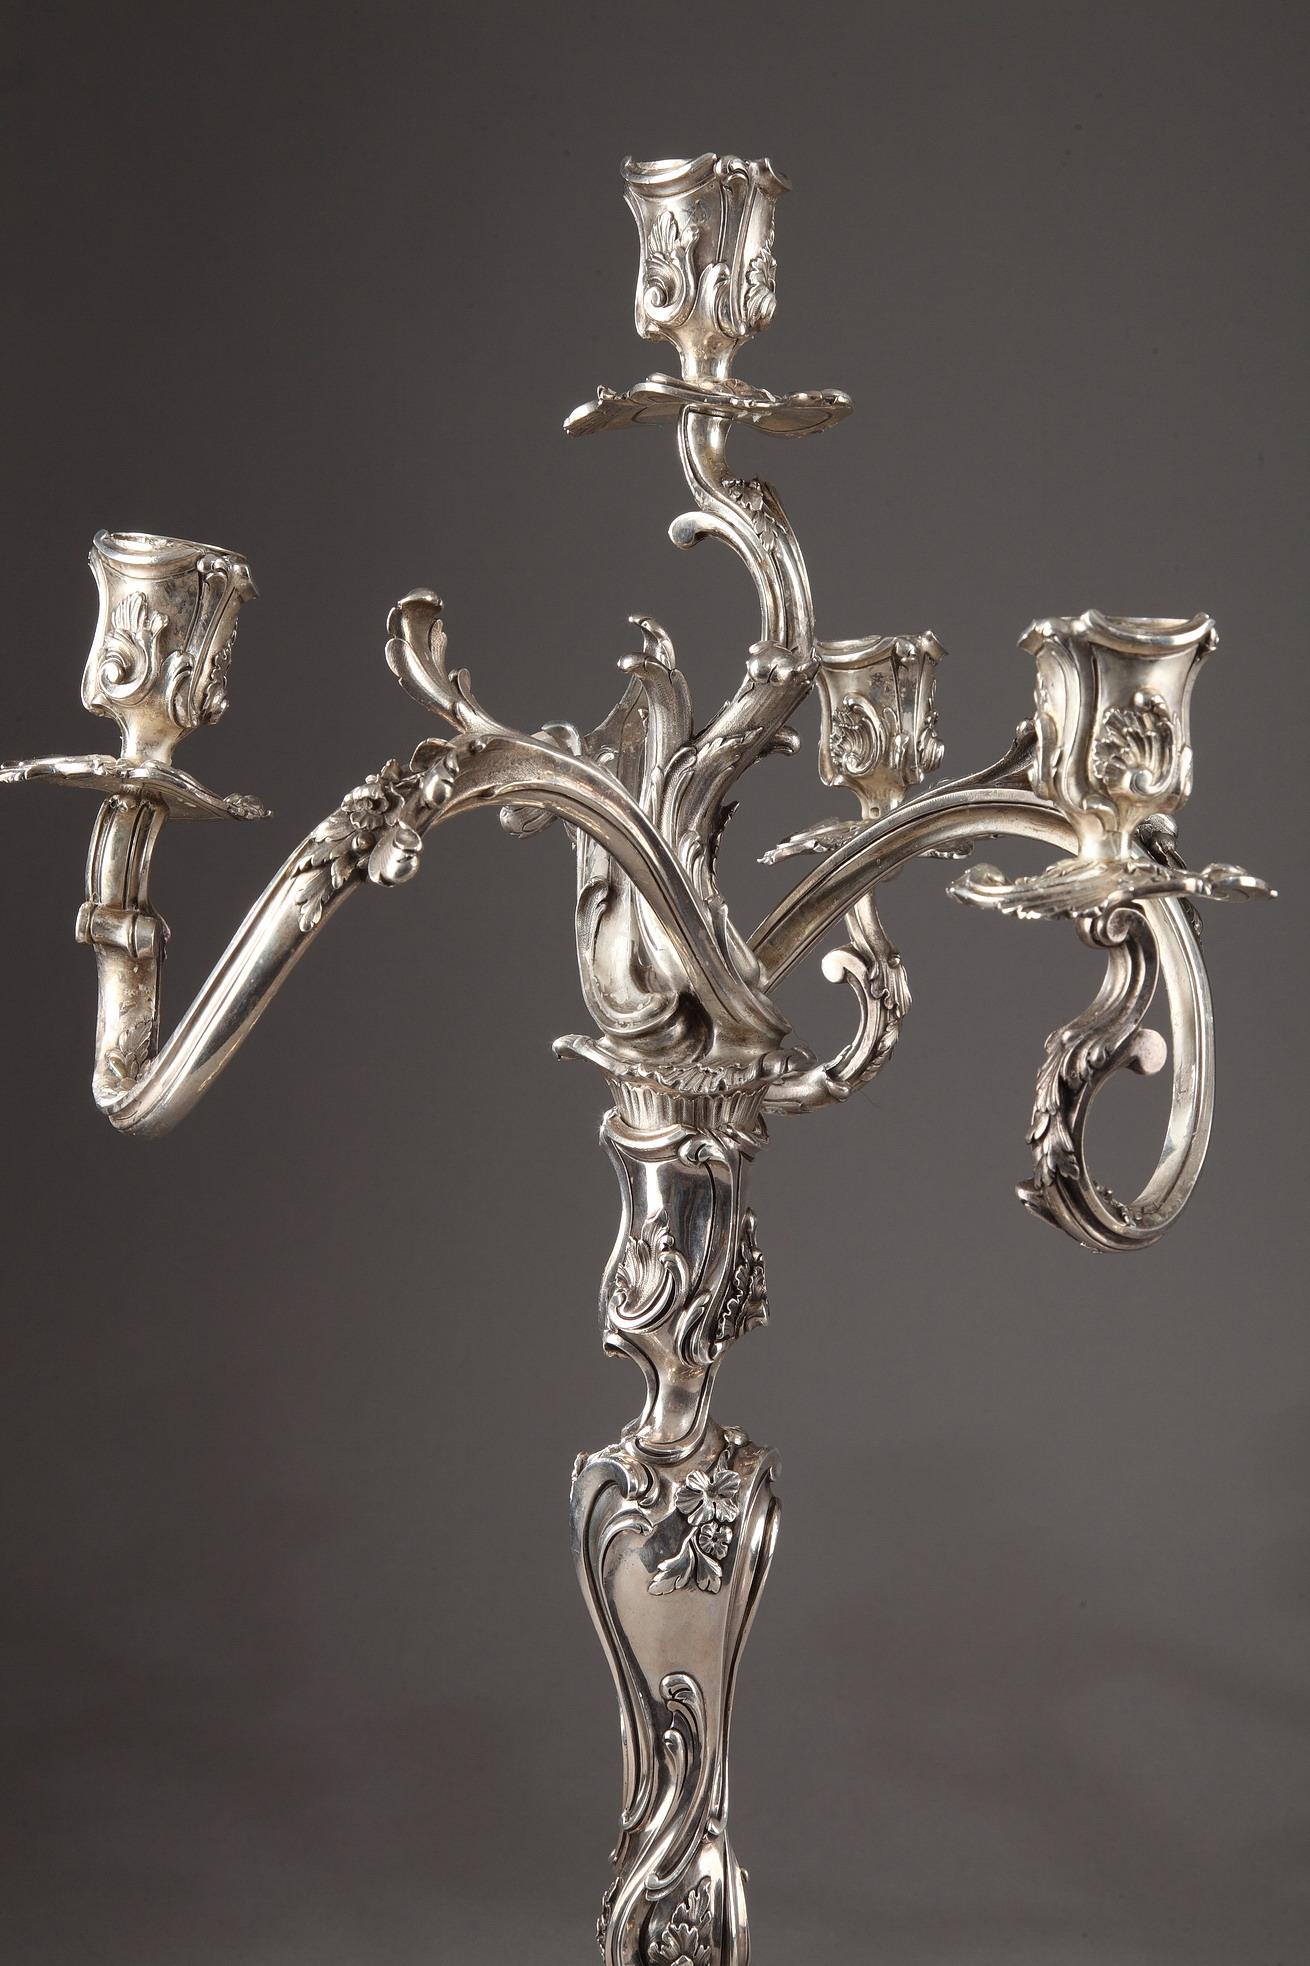 Pair of Louis XV style candelabra in silver with rocailles decor and asymmetrical ornamentation. The four arms of light ending in bobèches binettes are finely chiseled with stylized rinses, foliage and flowers.

These candelabra are a creation of